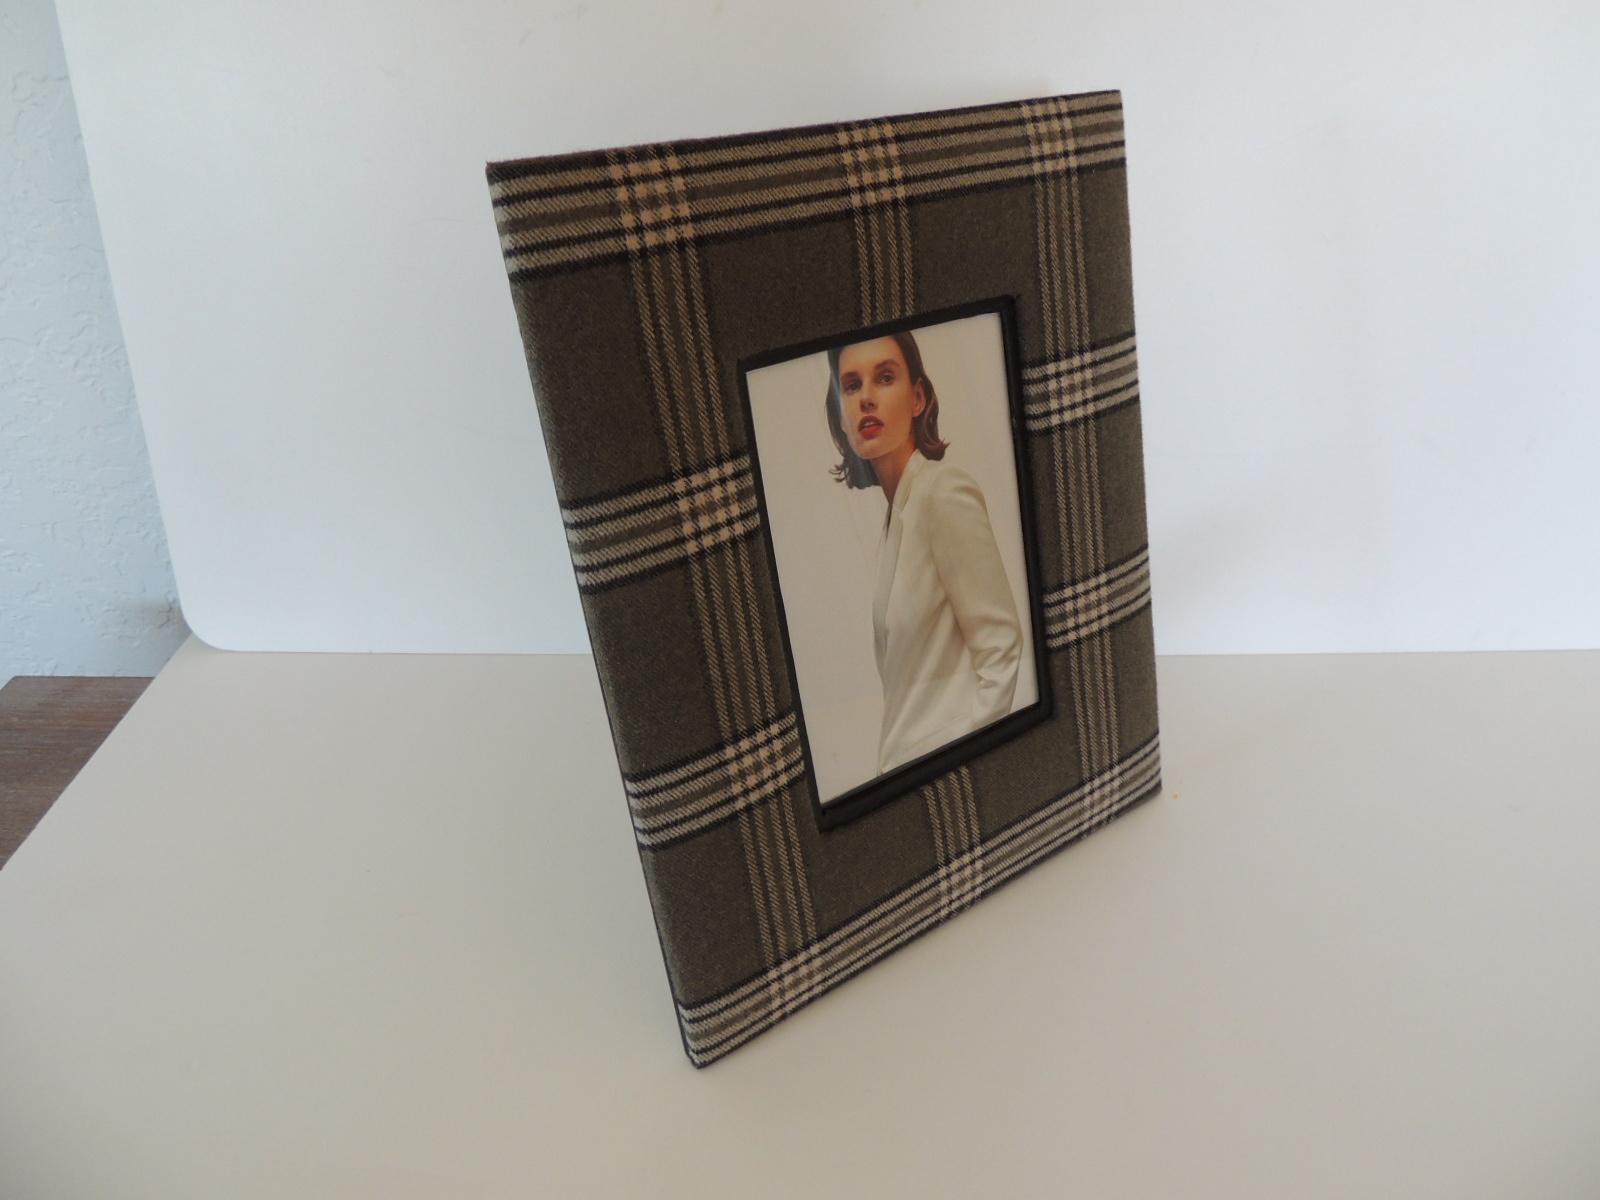 Wool plaid picture frame with vegan leather trim.
Glass cover.
Size: 10.5